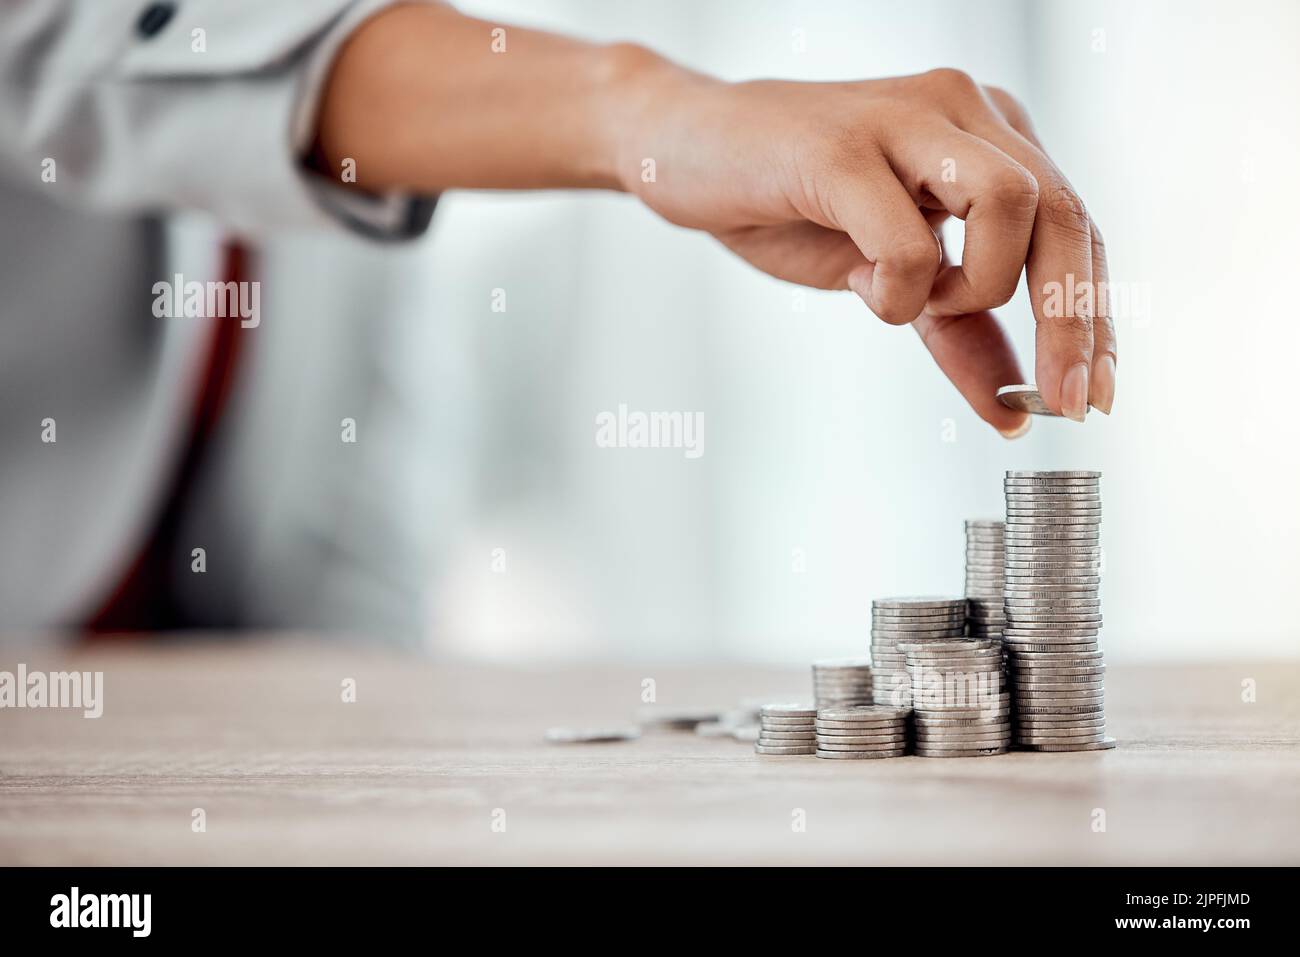 1 cent in hand stock image. Image of mini, money, little - 34282763